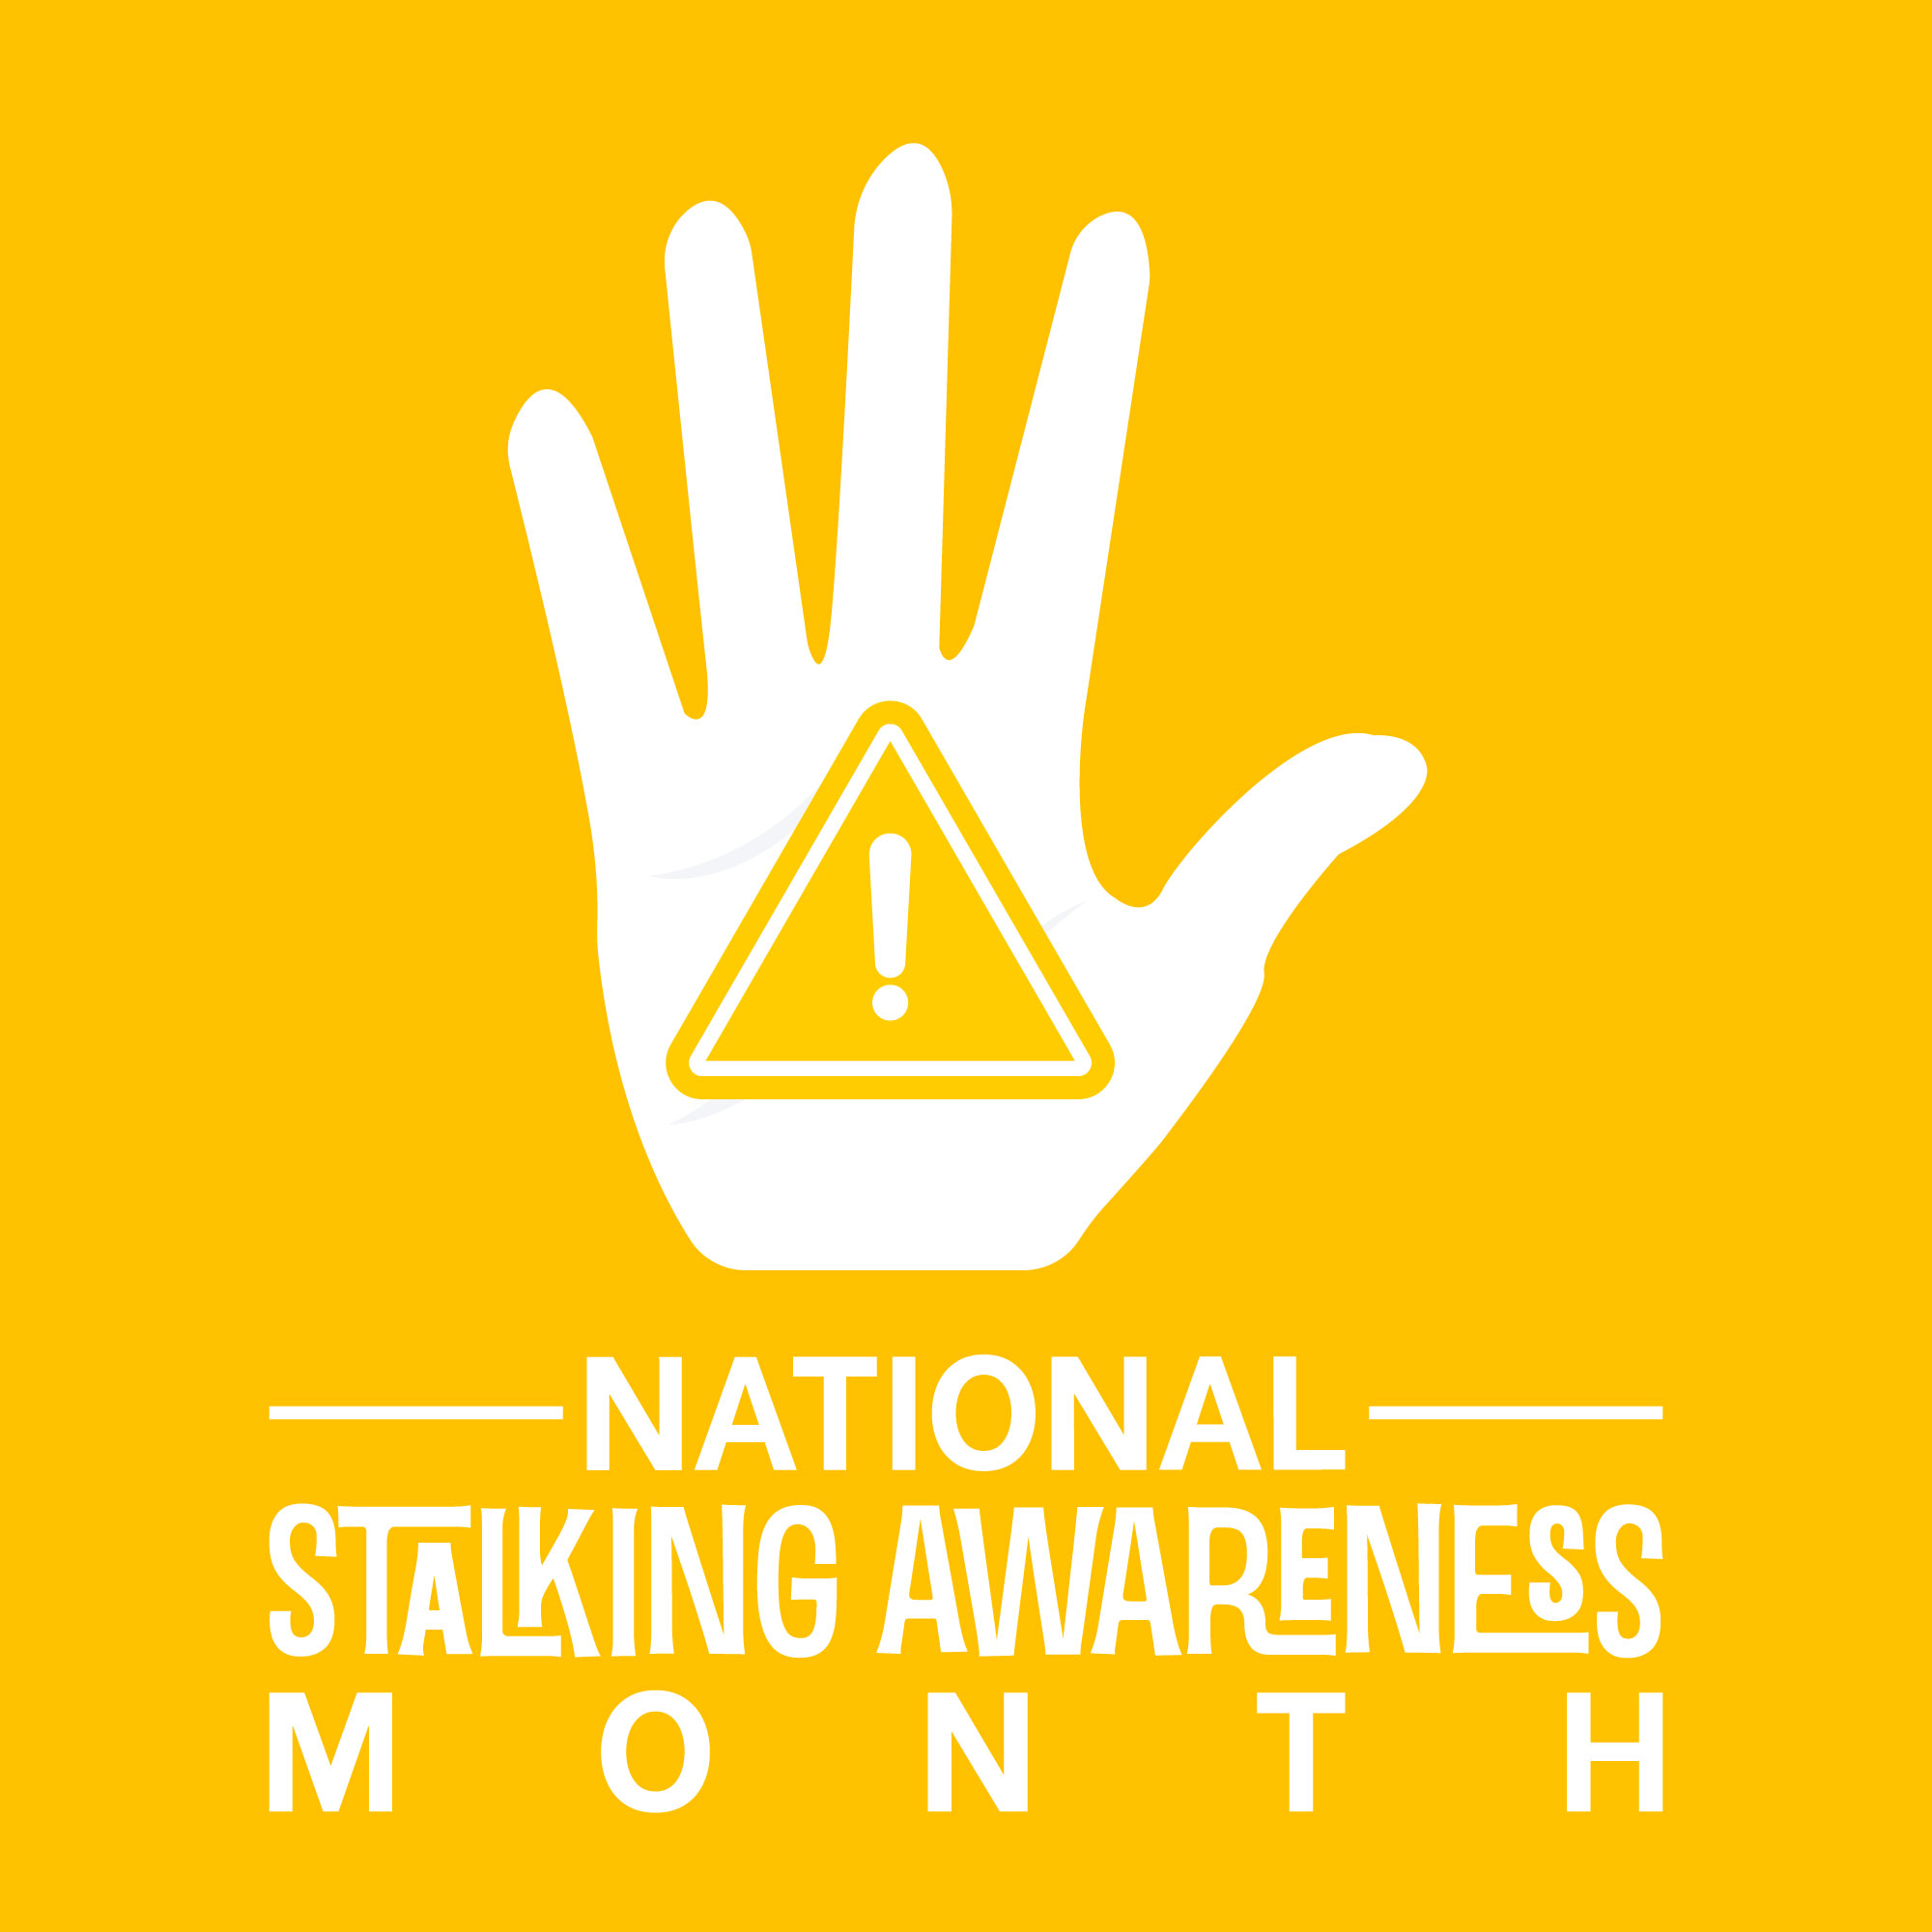 What is Stalking Awareness Month?